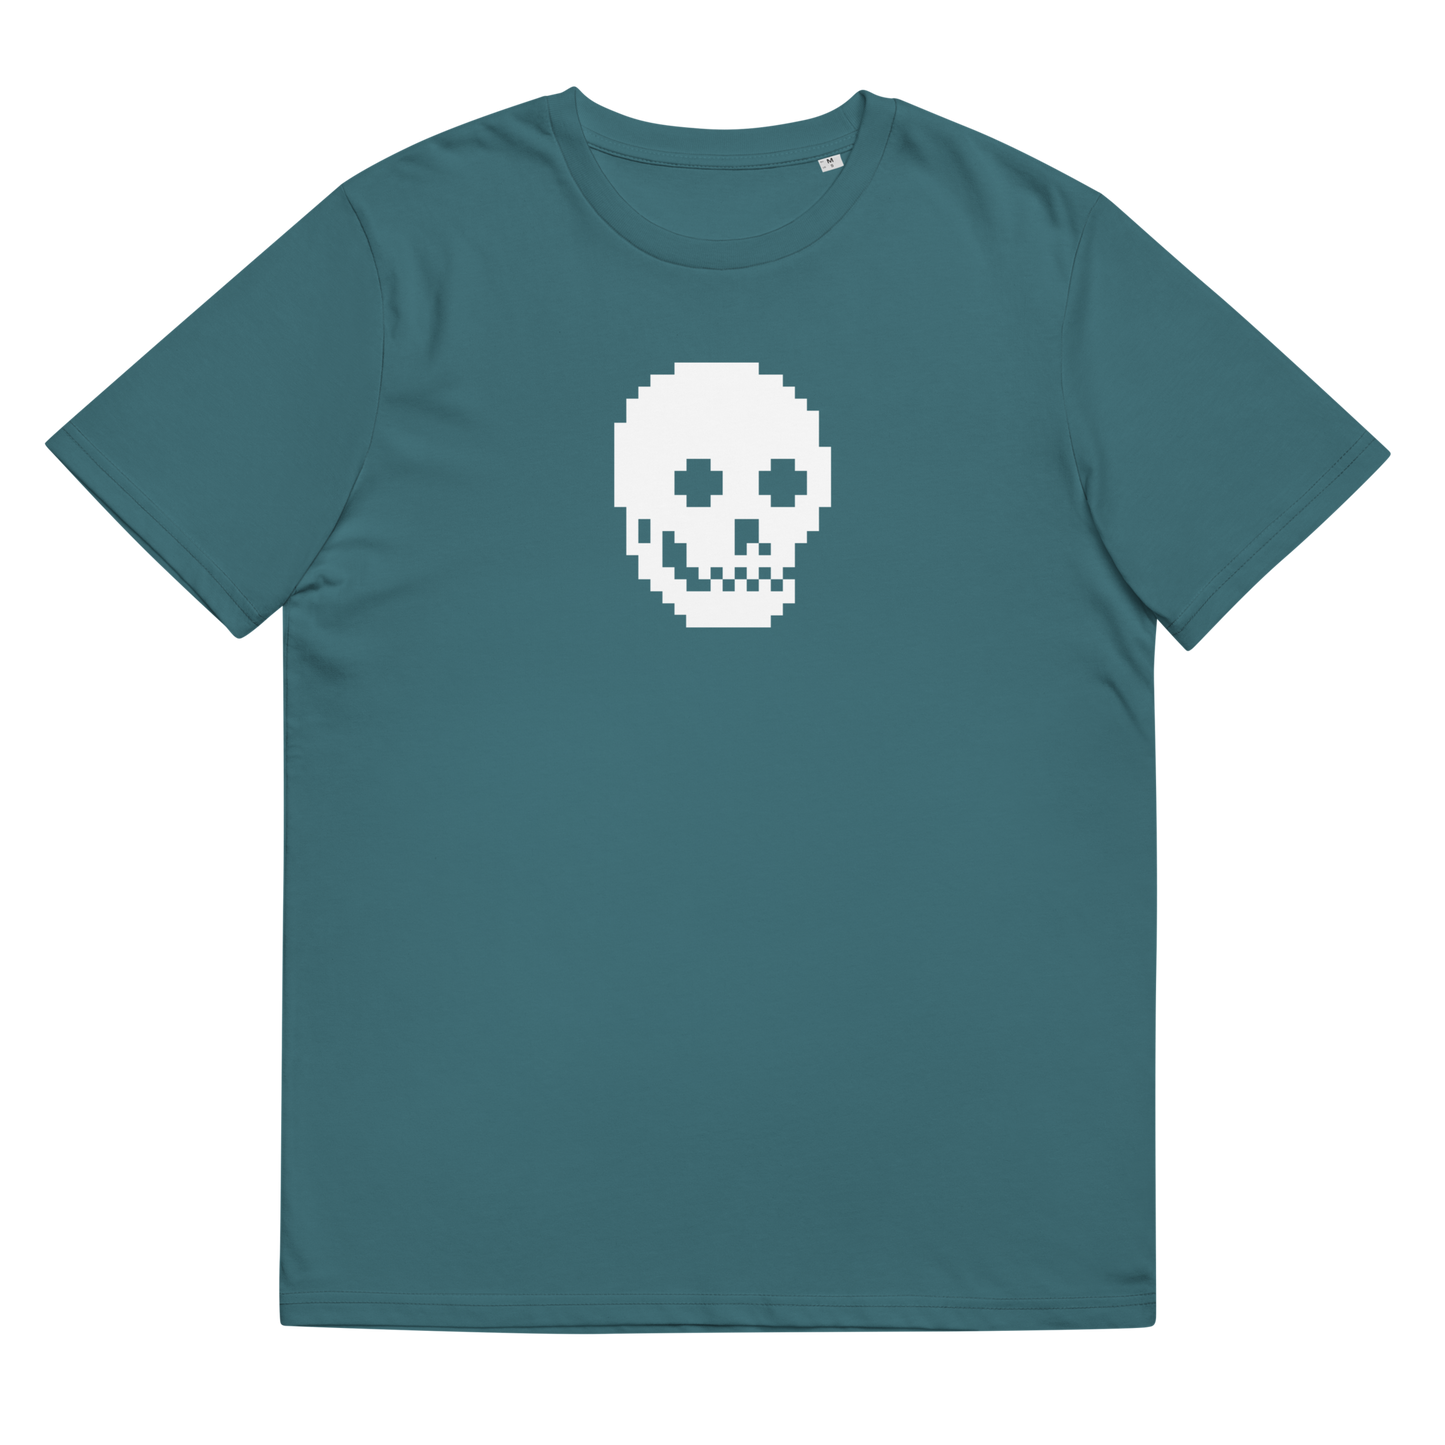 A Ghoul Tee